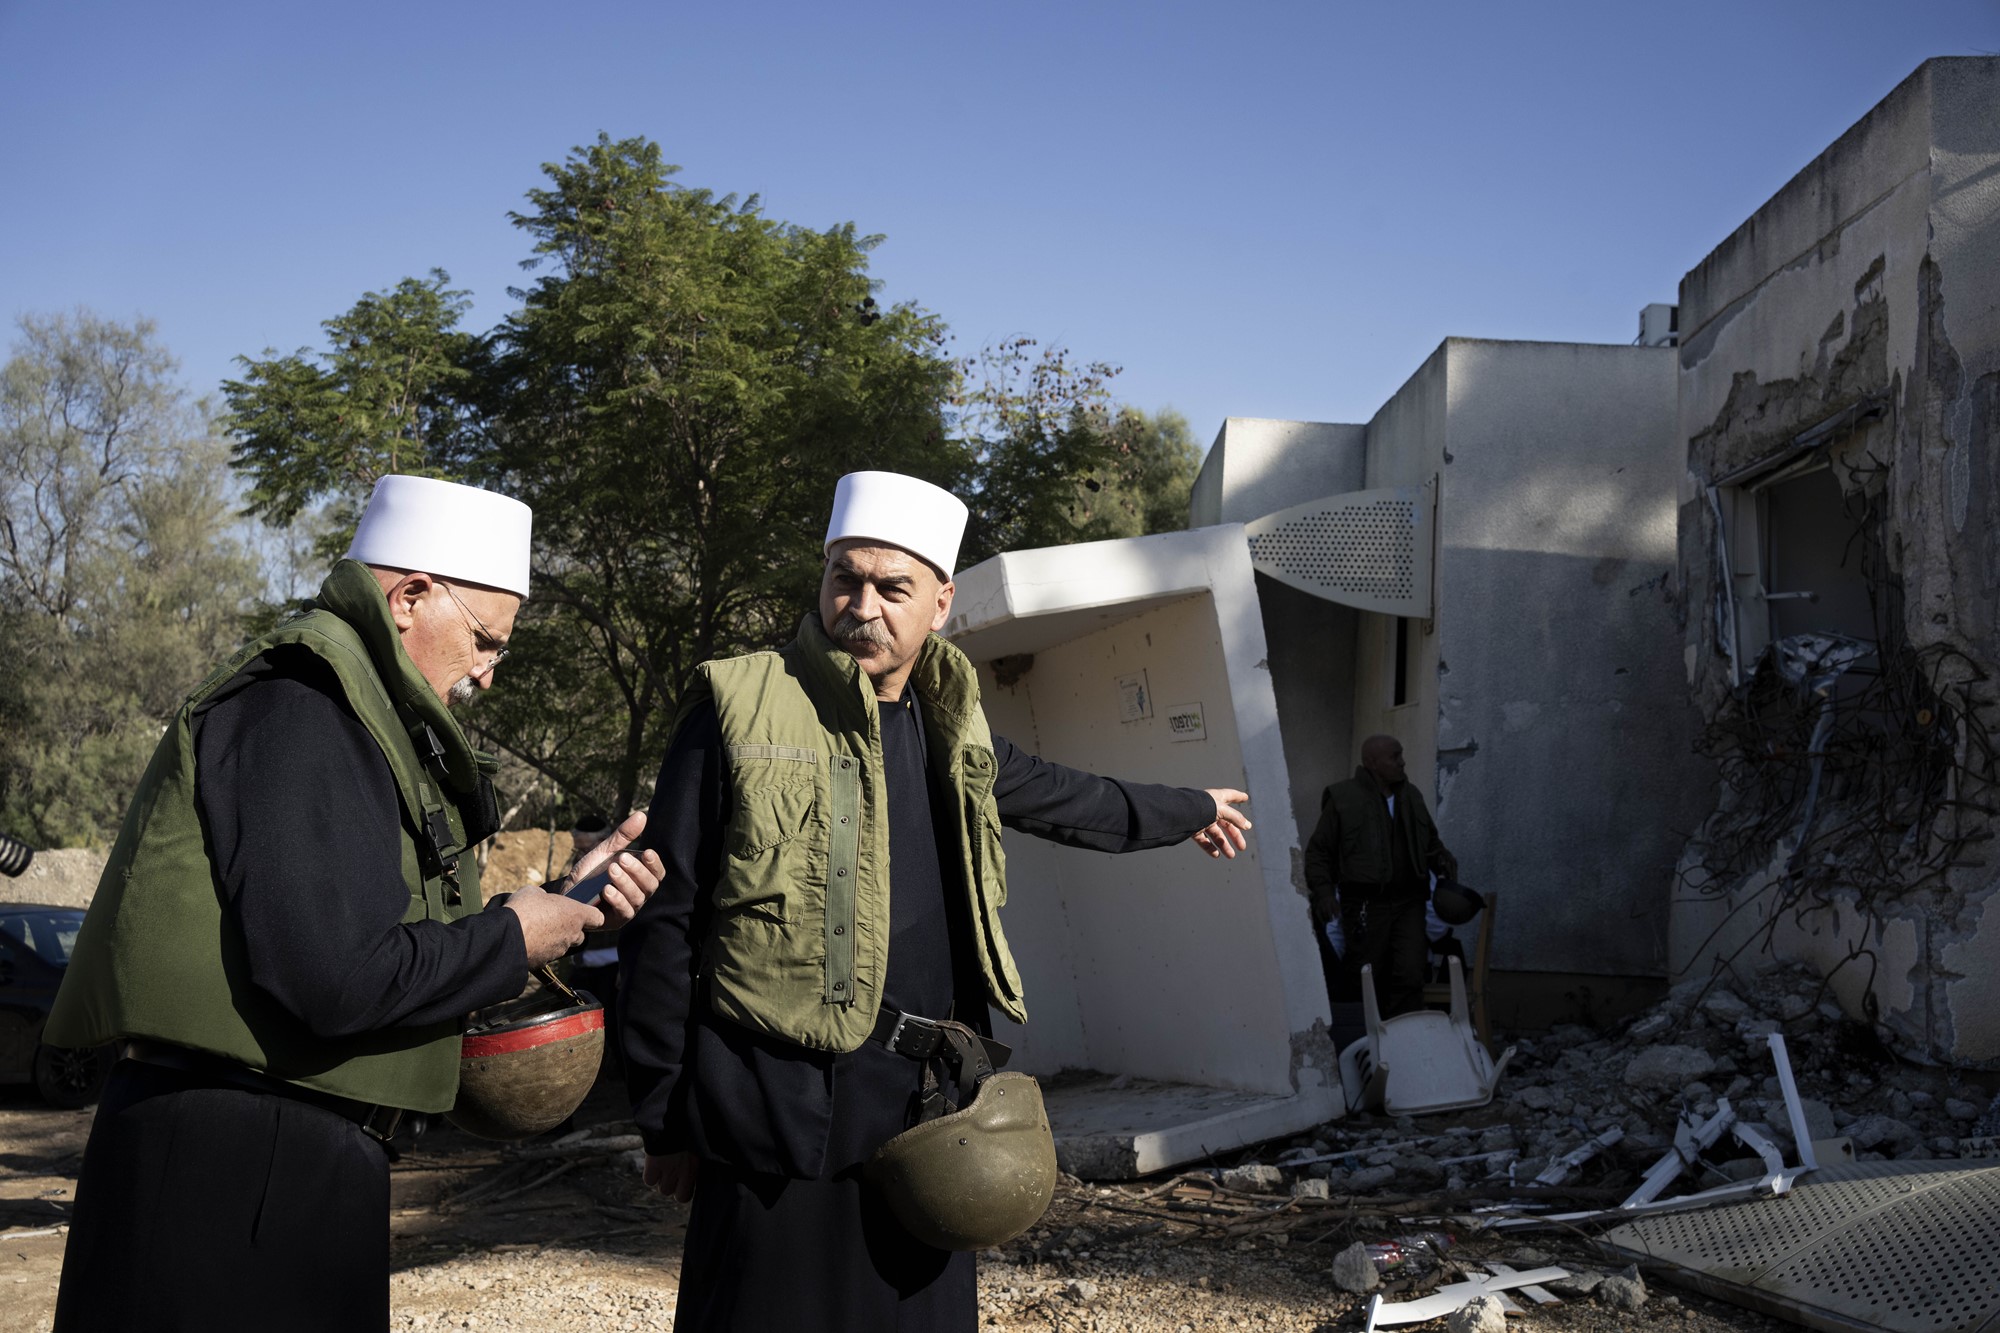 Two Druze faith leaders in traditional headwear stand near a damaged building, both carrying helmets. One points to the building